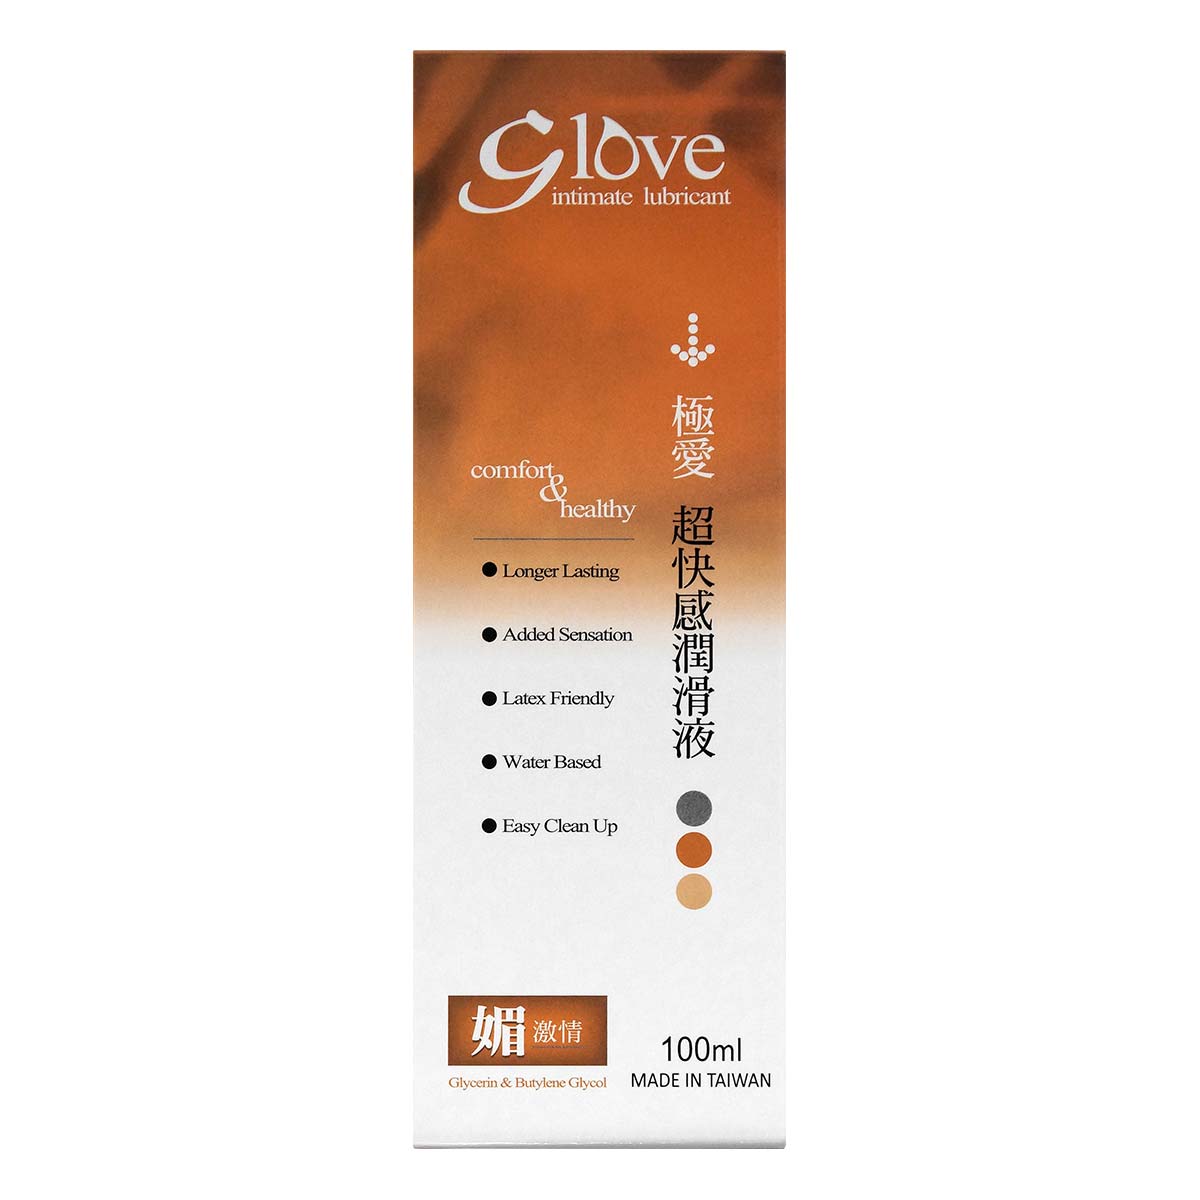 G Love intimate lubricant [Glycerin & Butylene Glycol] 100ml Water-based Lubricant (Short Expiry)-p_2